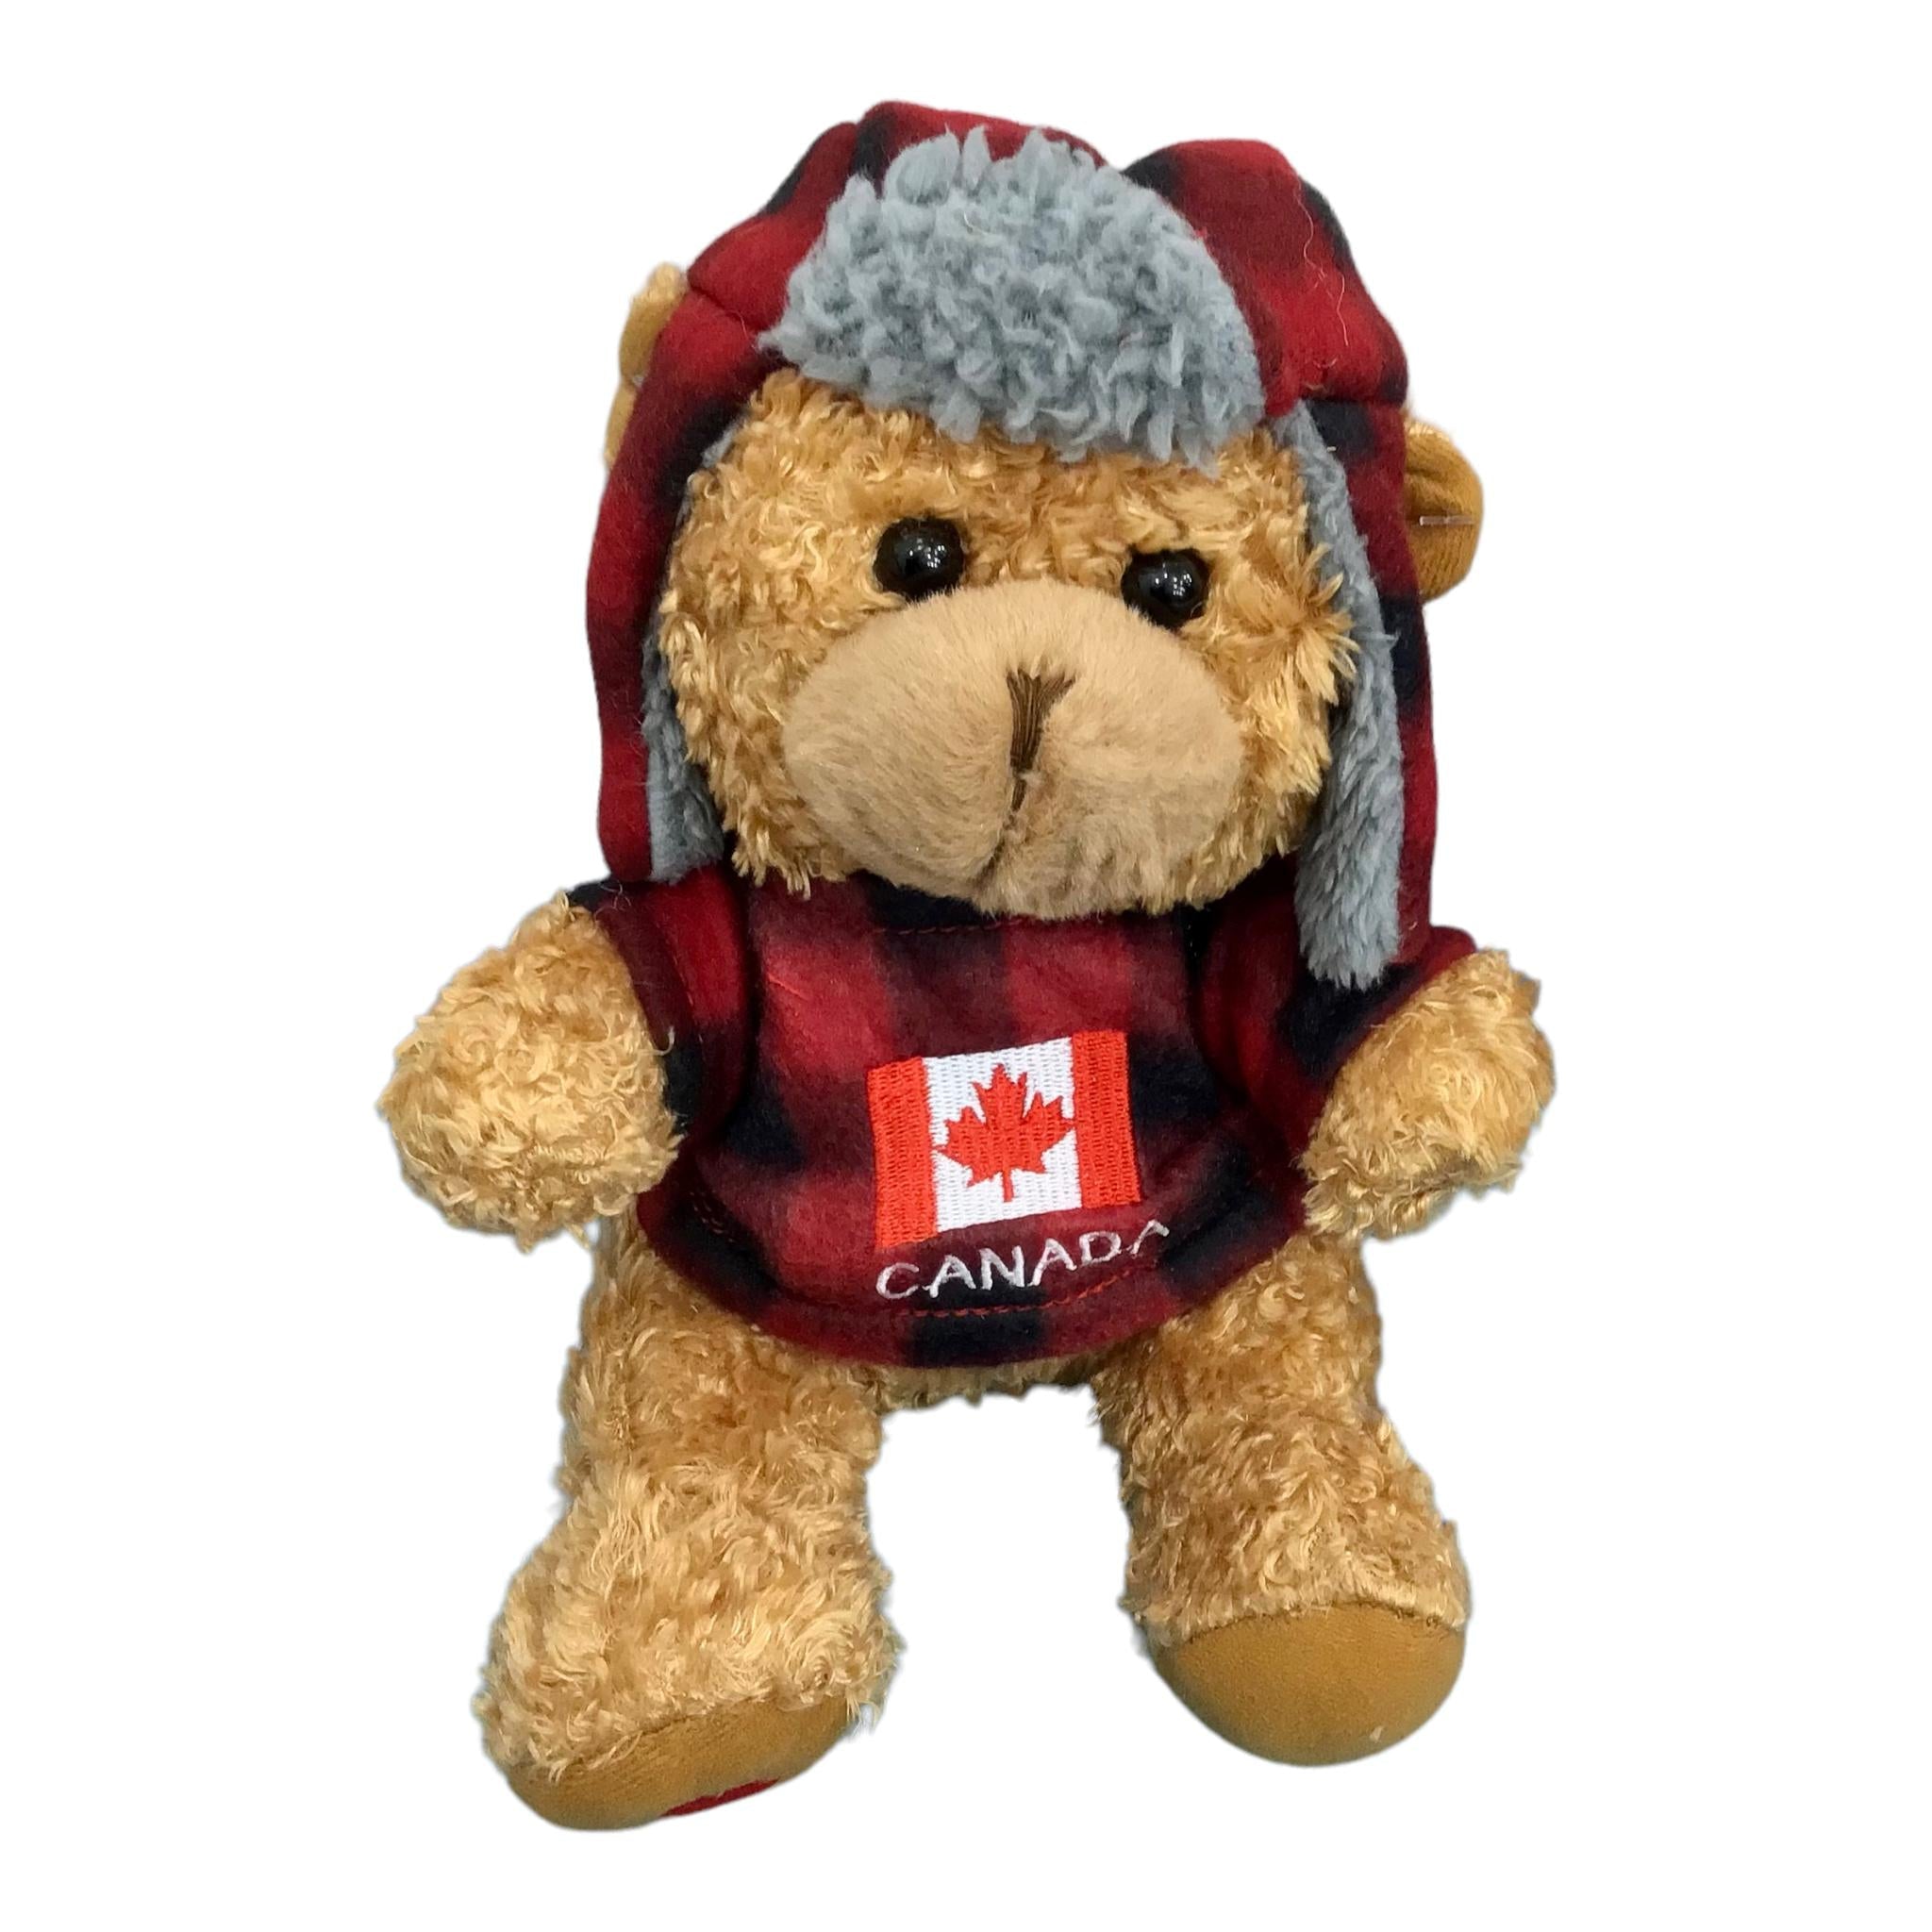 Canada Bear Stuffed Animal Buffalo Plaid Top and Hat | Canadian Flag and Name Drop Embroidery | Teddy Bear Stuffed Plush Toy | Soft Cuddly Stuffed Bear for Baby, Boys and Girls